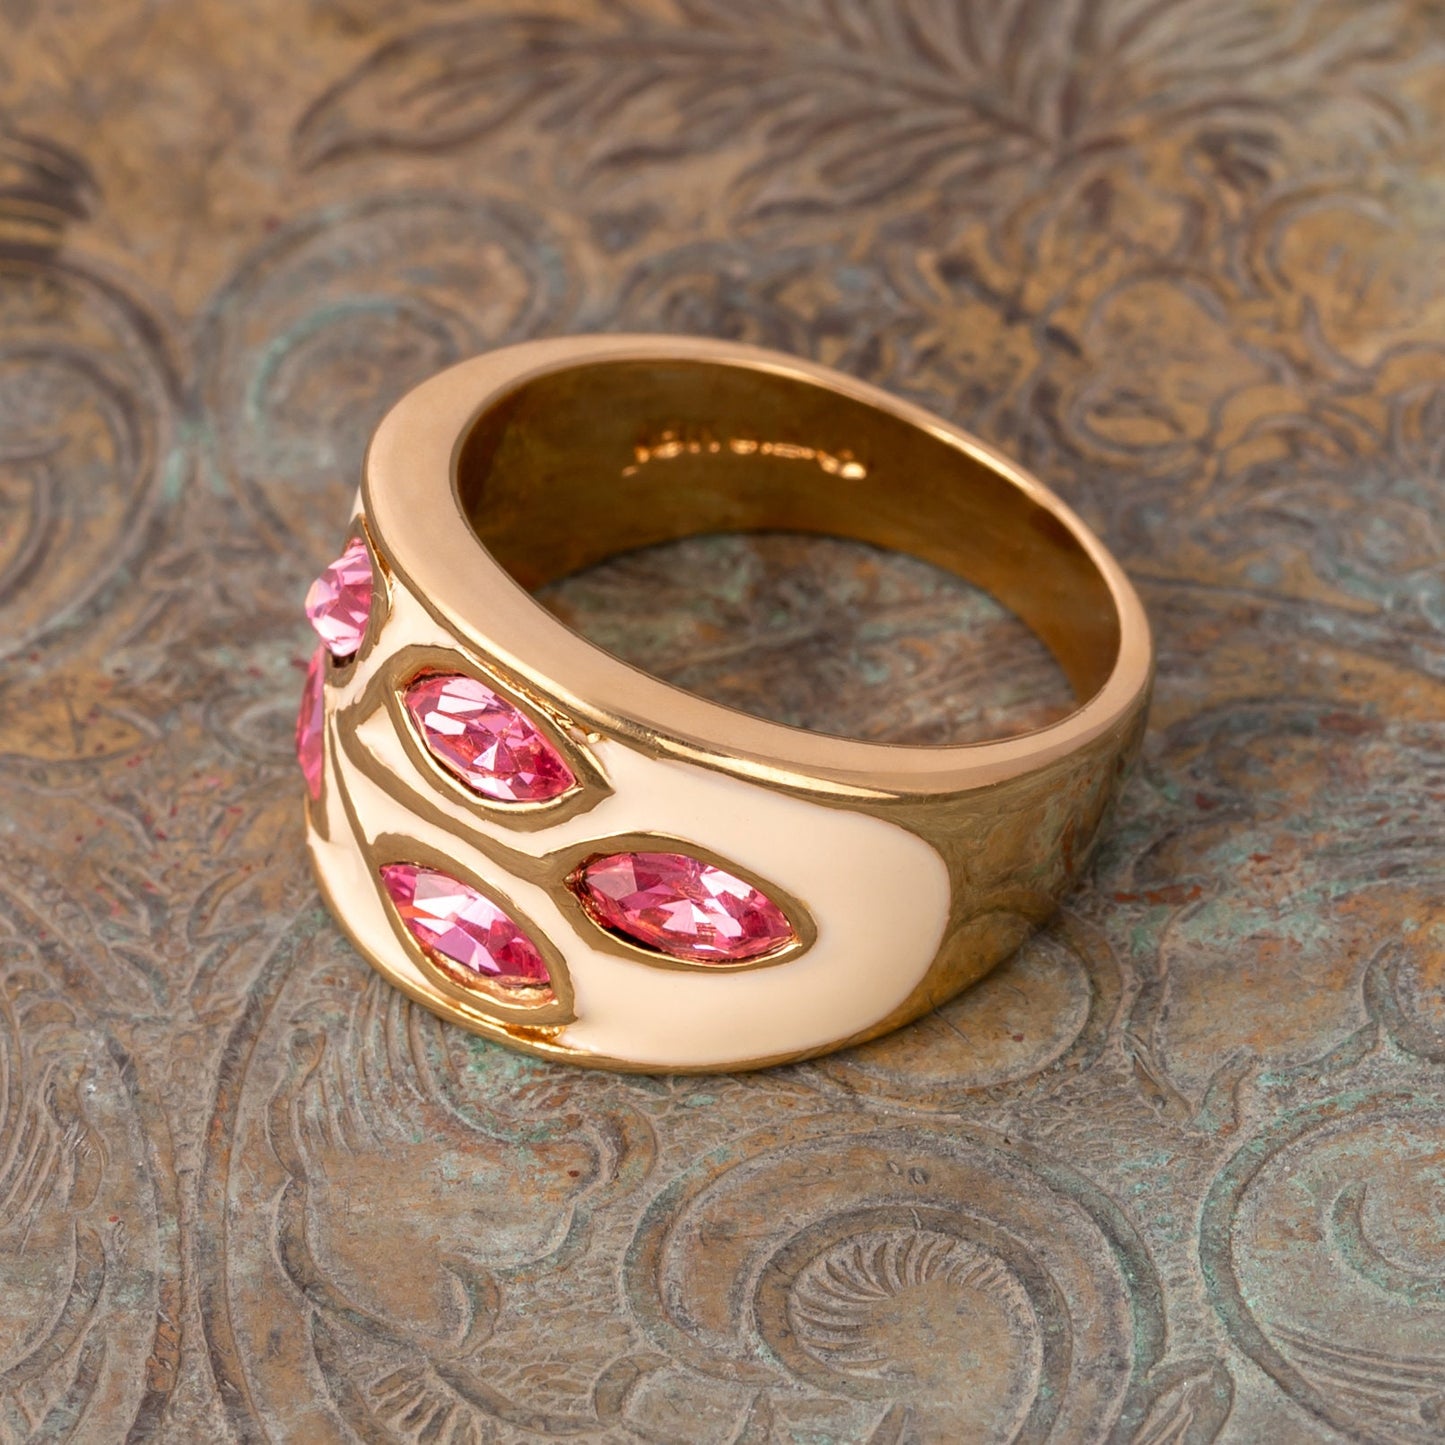 Vintage Ring 1980s White Enamel Ring with Pink Crystal Leaf Motif 18k Gold Plated Antique Womans Jewelry #R3043 - Limited Stock - Never Worn